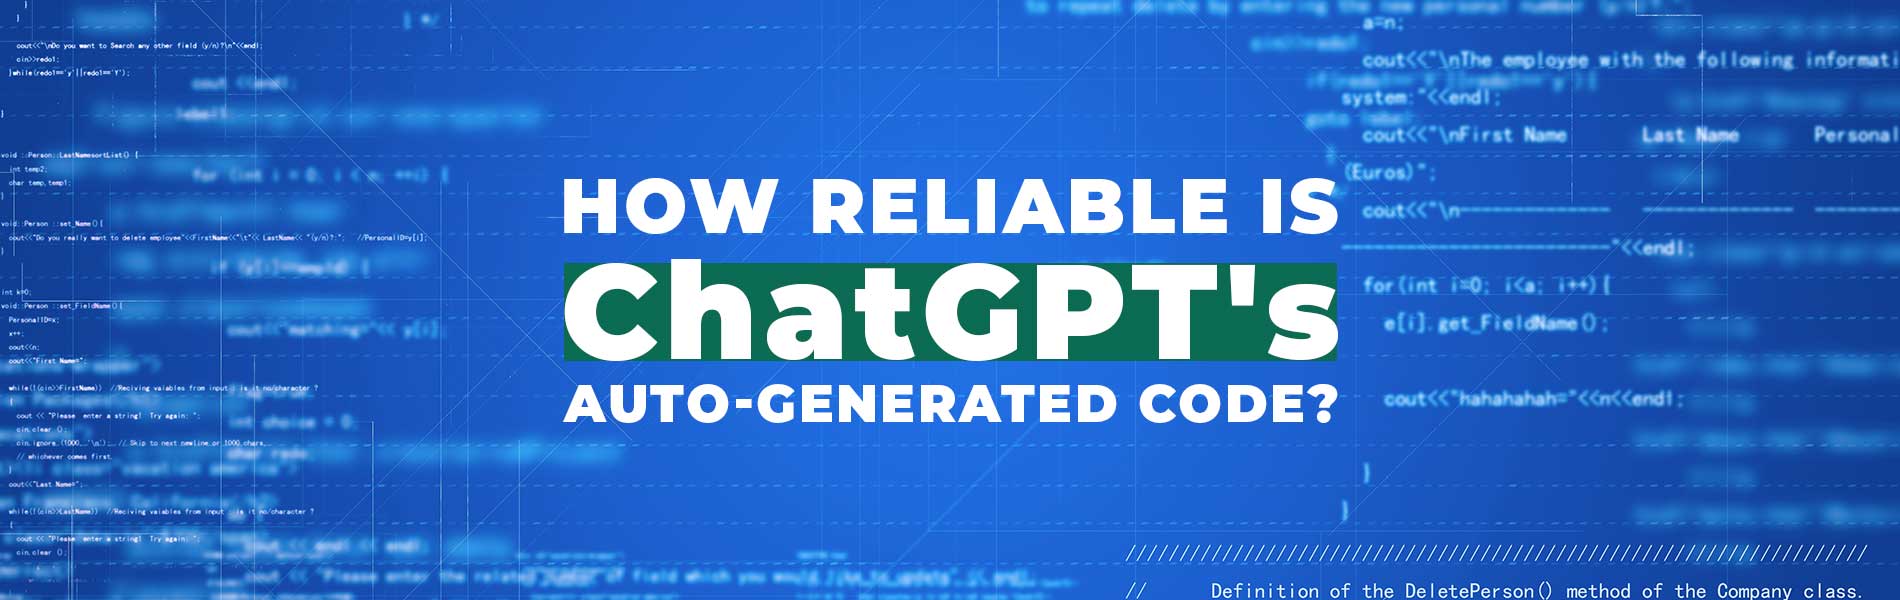 How Reliable is ChatGPT’s Auto-Generated Code?